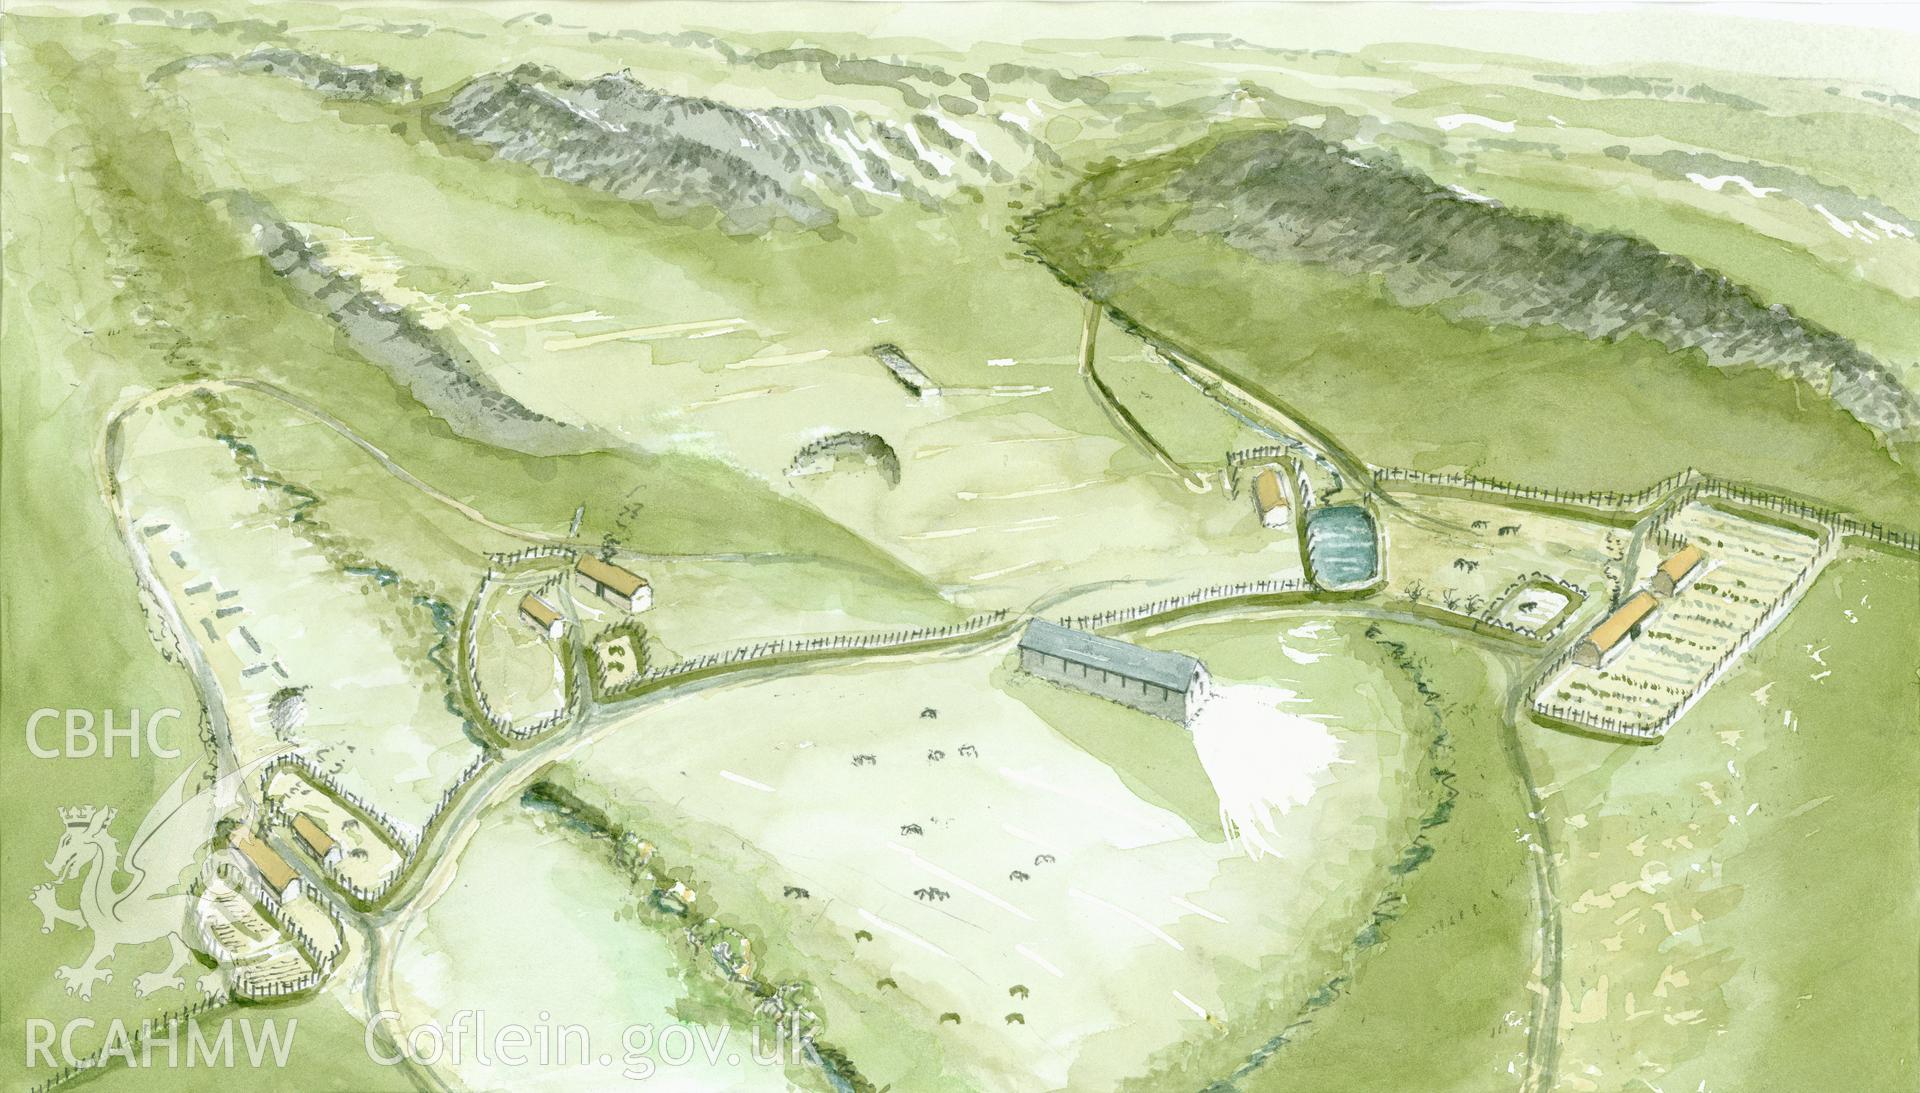 Watercolour showing the Troed y Rhiw landscape as it would have appeared around 1500, produced by Geoff Ward, 2009